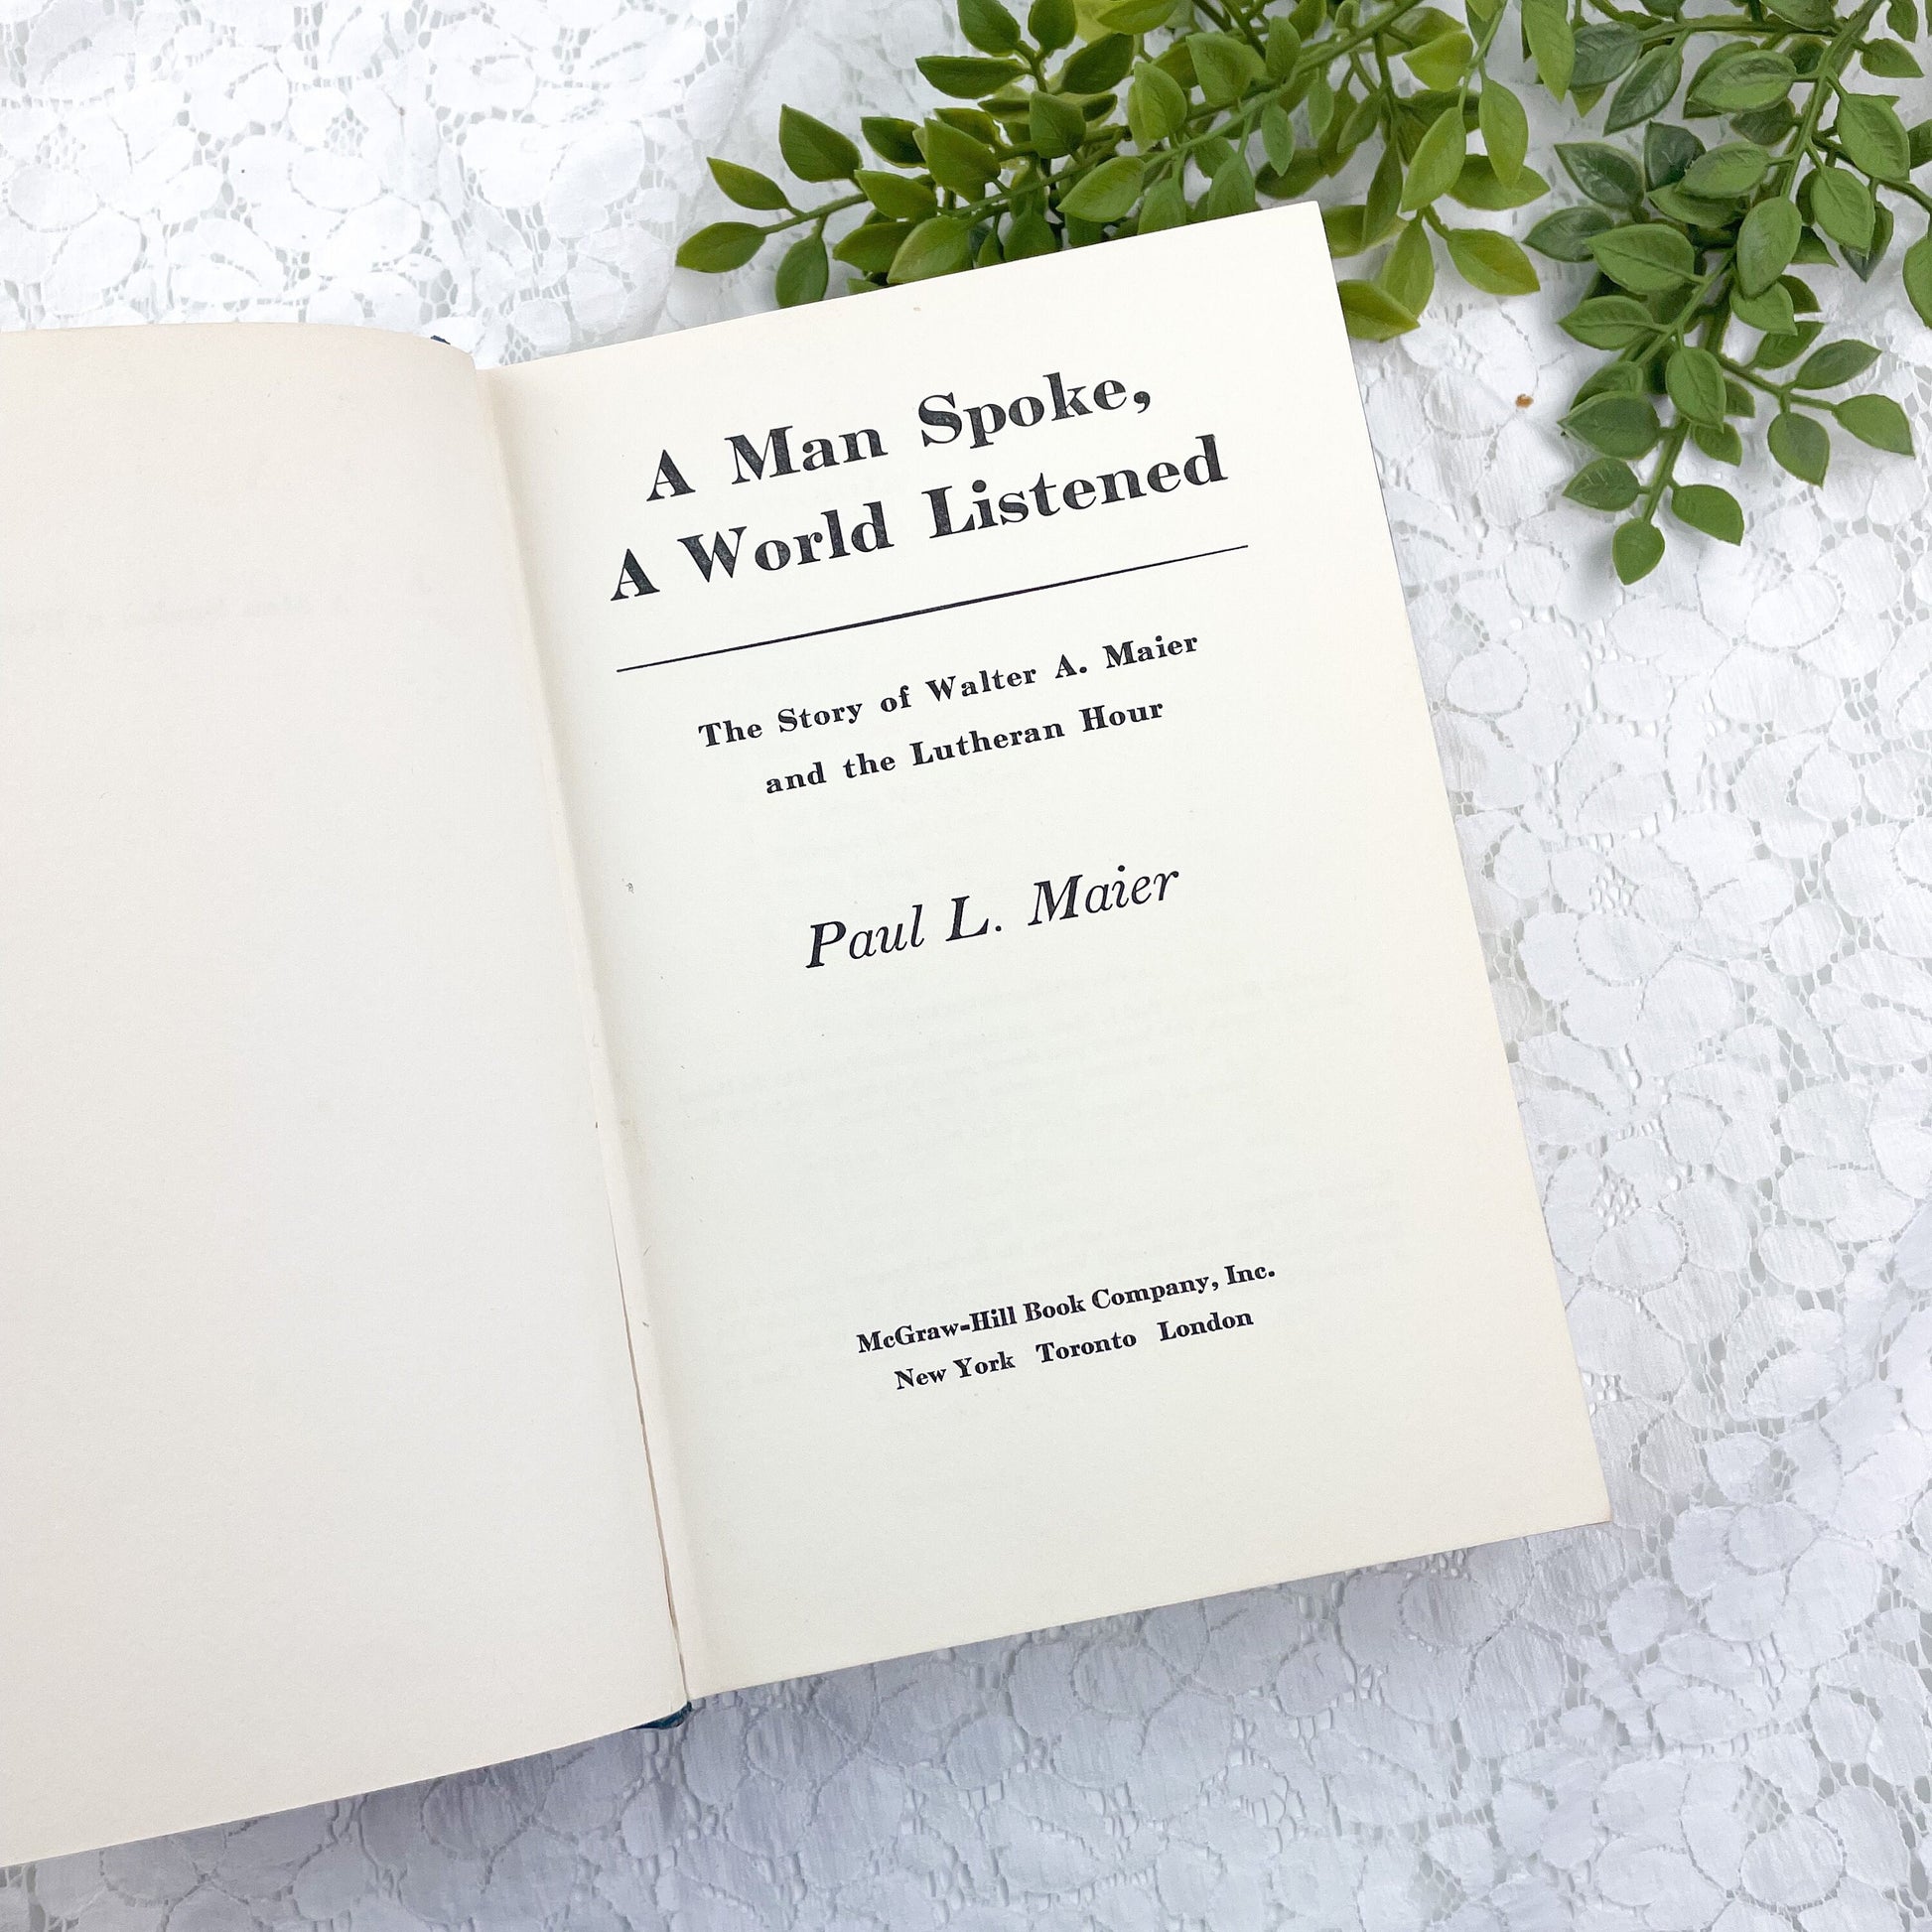 A Man Spoke, A World Listened signed by Paul L. Maier